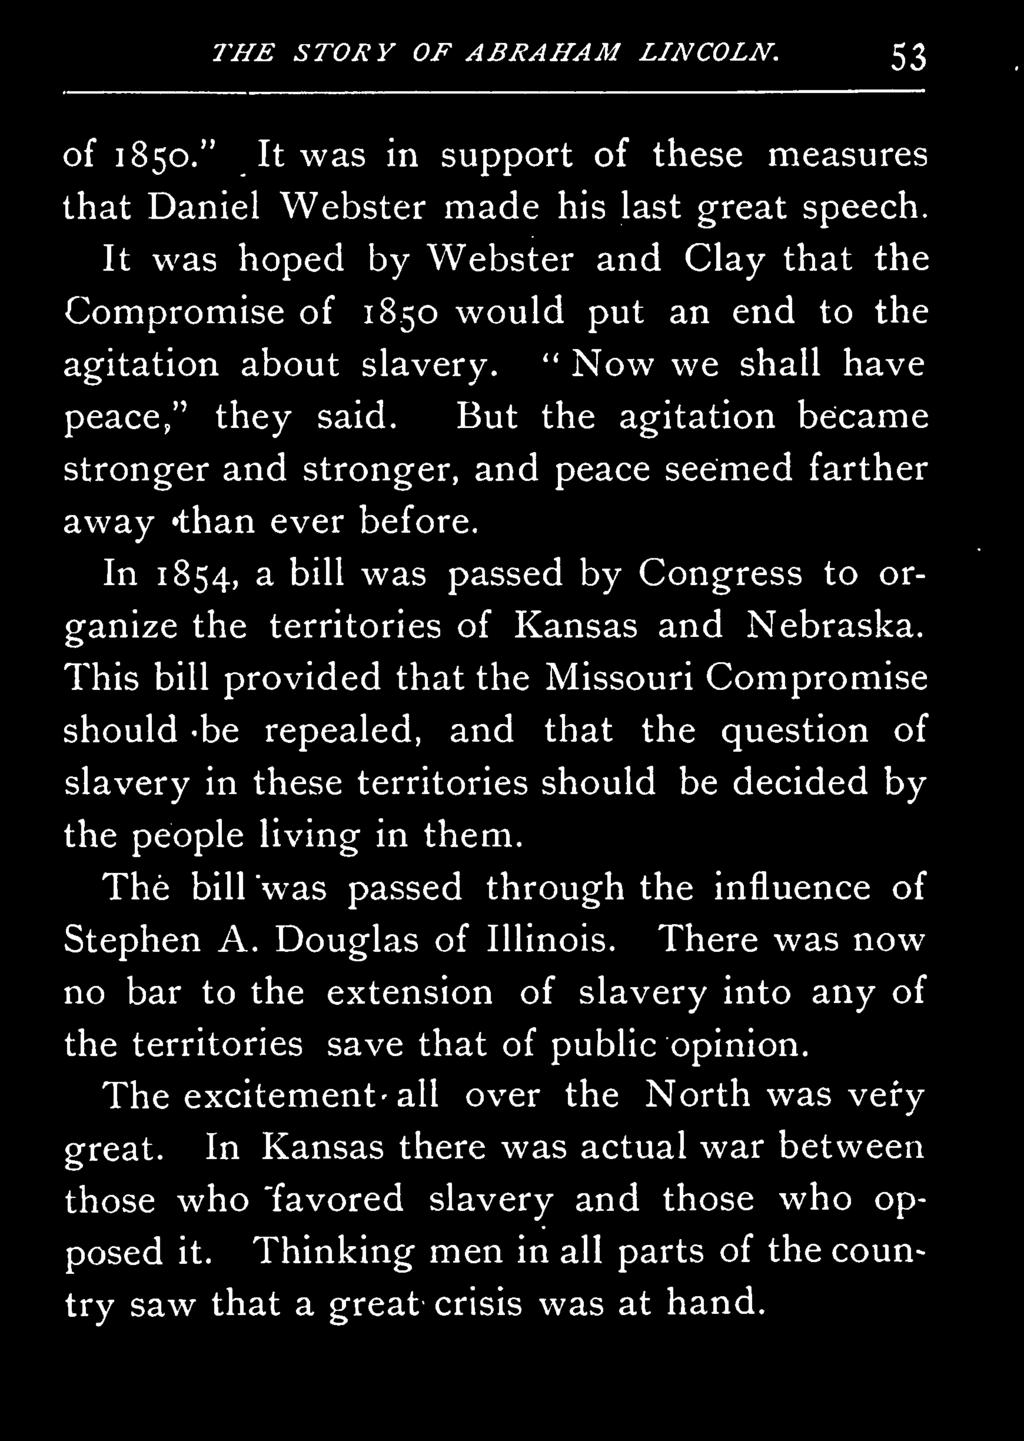 This bill provided that the Missouri Compromise should be repealed, and that the question of slavery in these territories should be the people living in them.